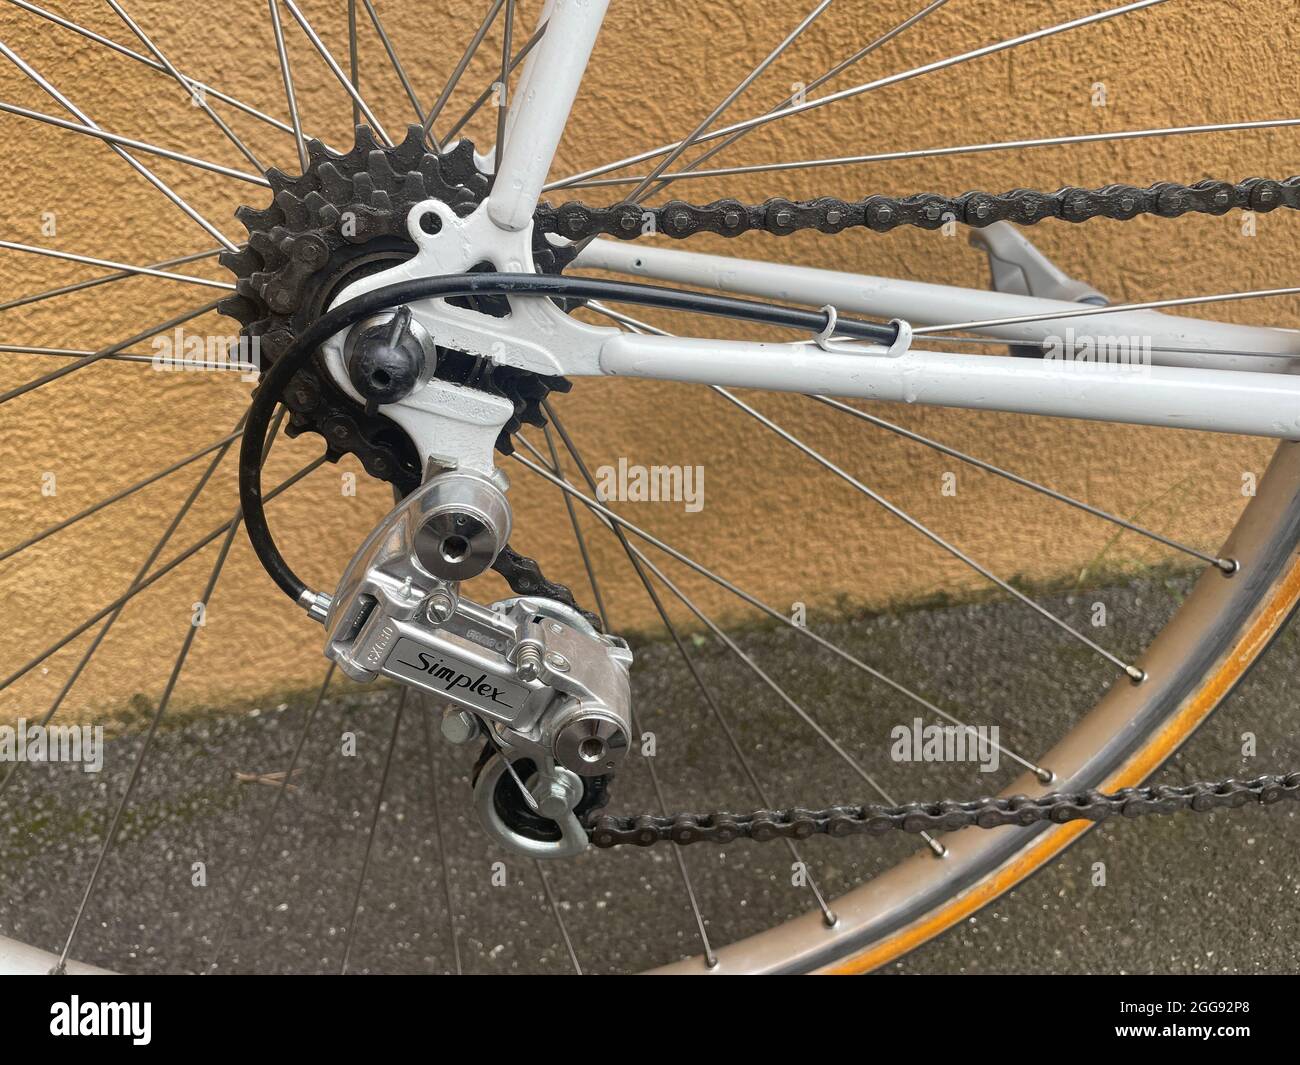 enns, austria, 21 aug 2018, simplex derailleur of a vintage peugeot road  bike from the 1970's built of reynolds 531 steel tubes Stock Photo - Alamy